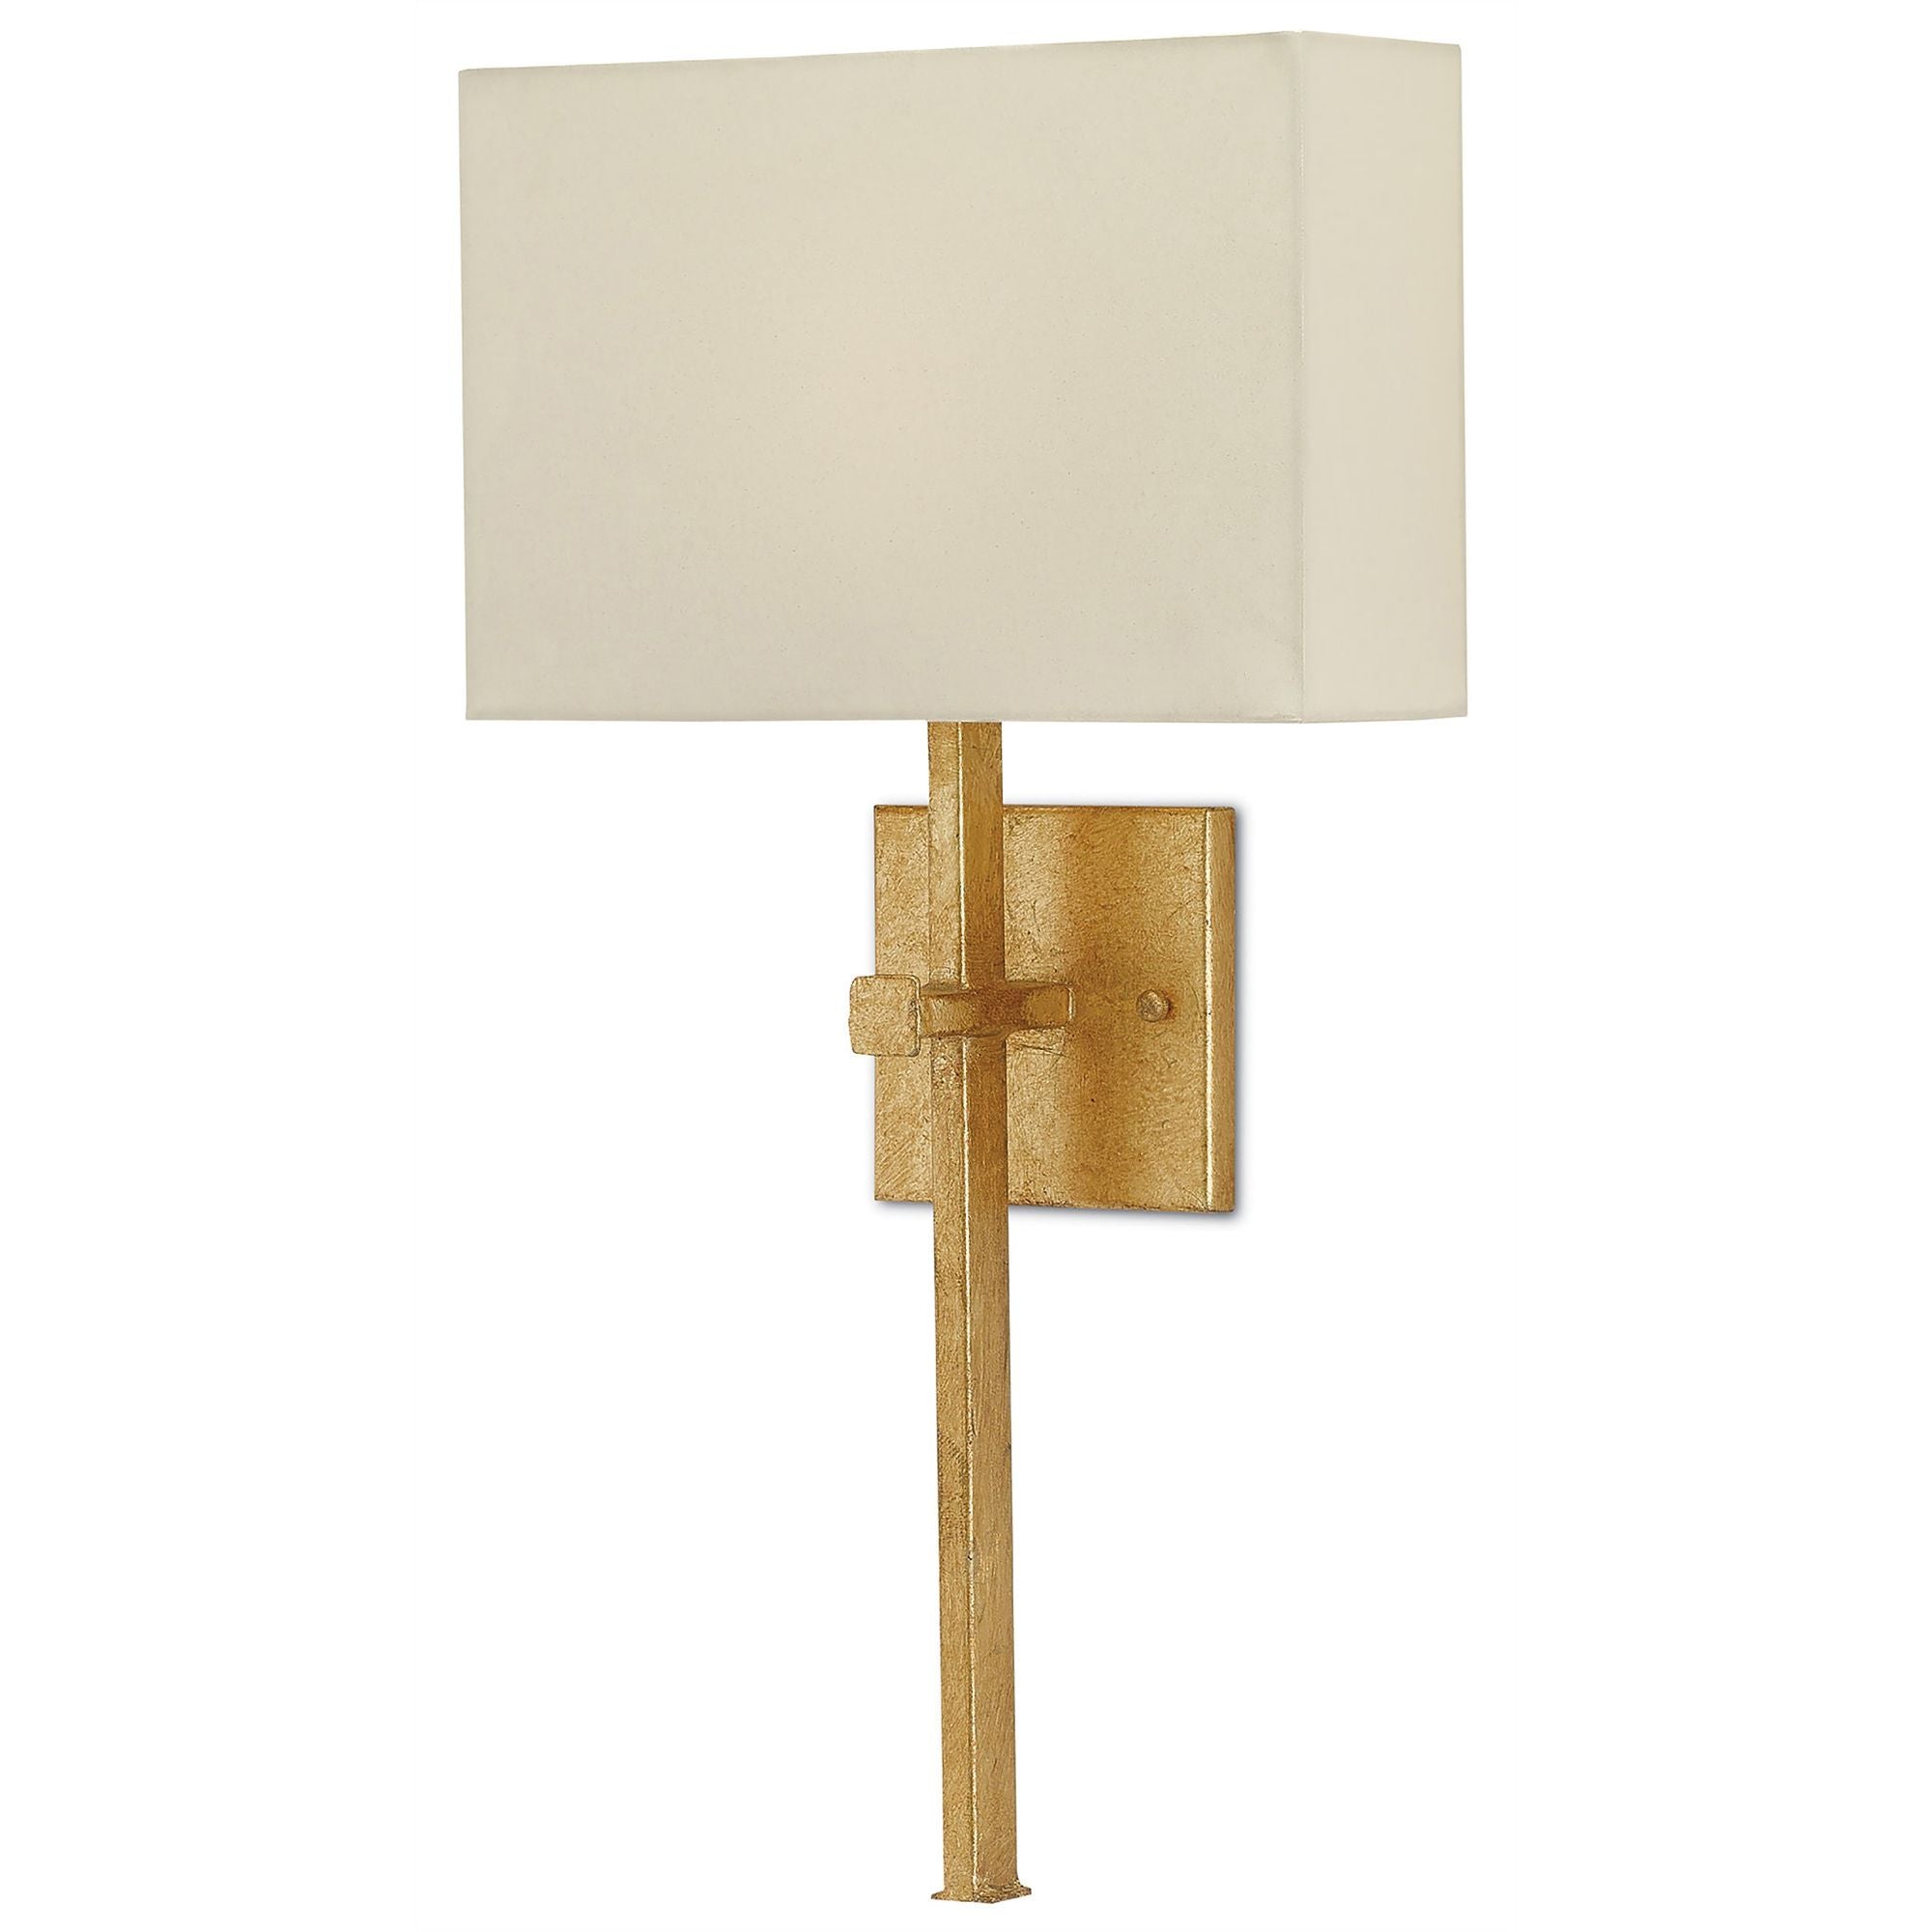 Ashdown Gold Wall Sconce, White Shade - Antique Gold Leaf